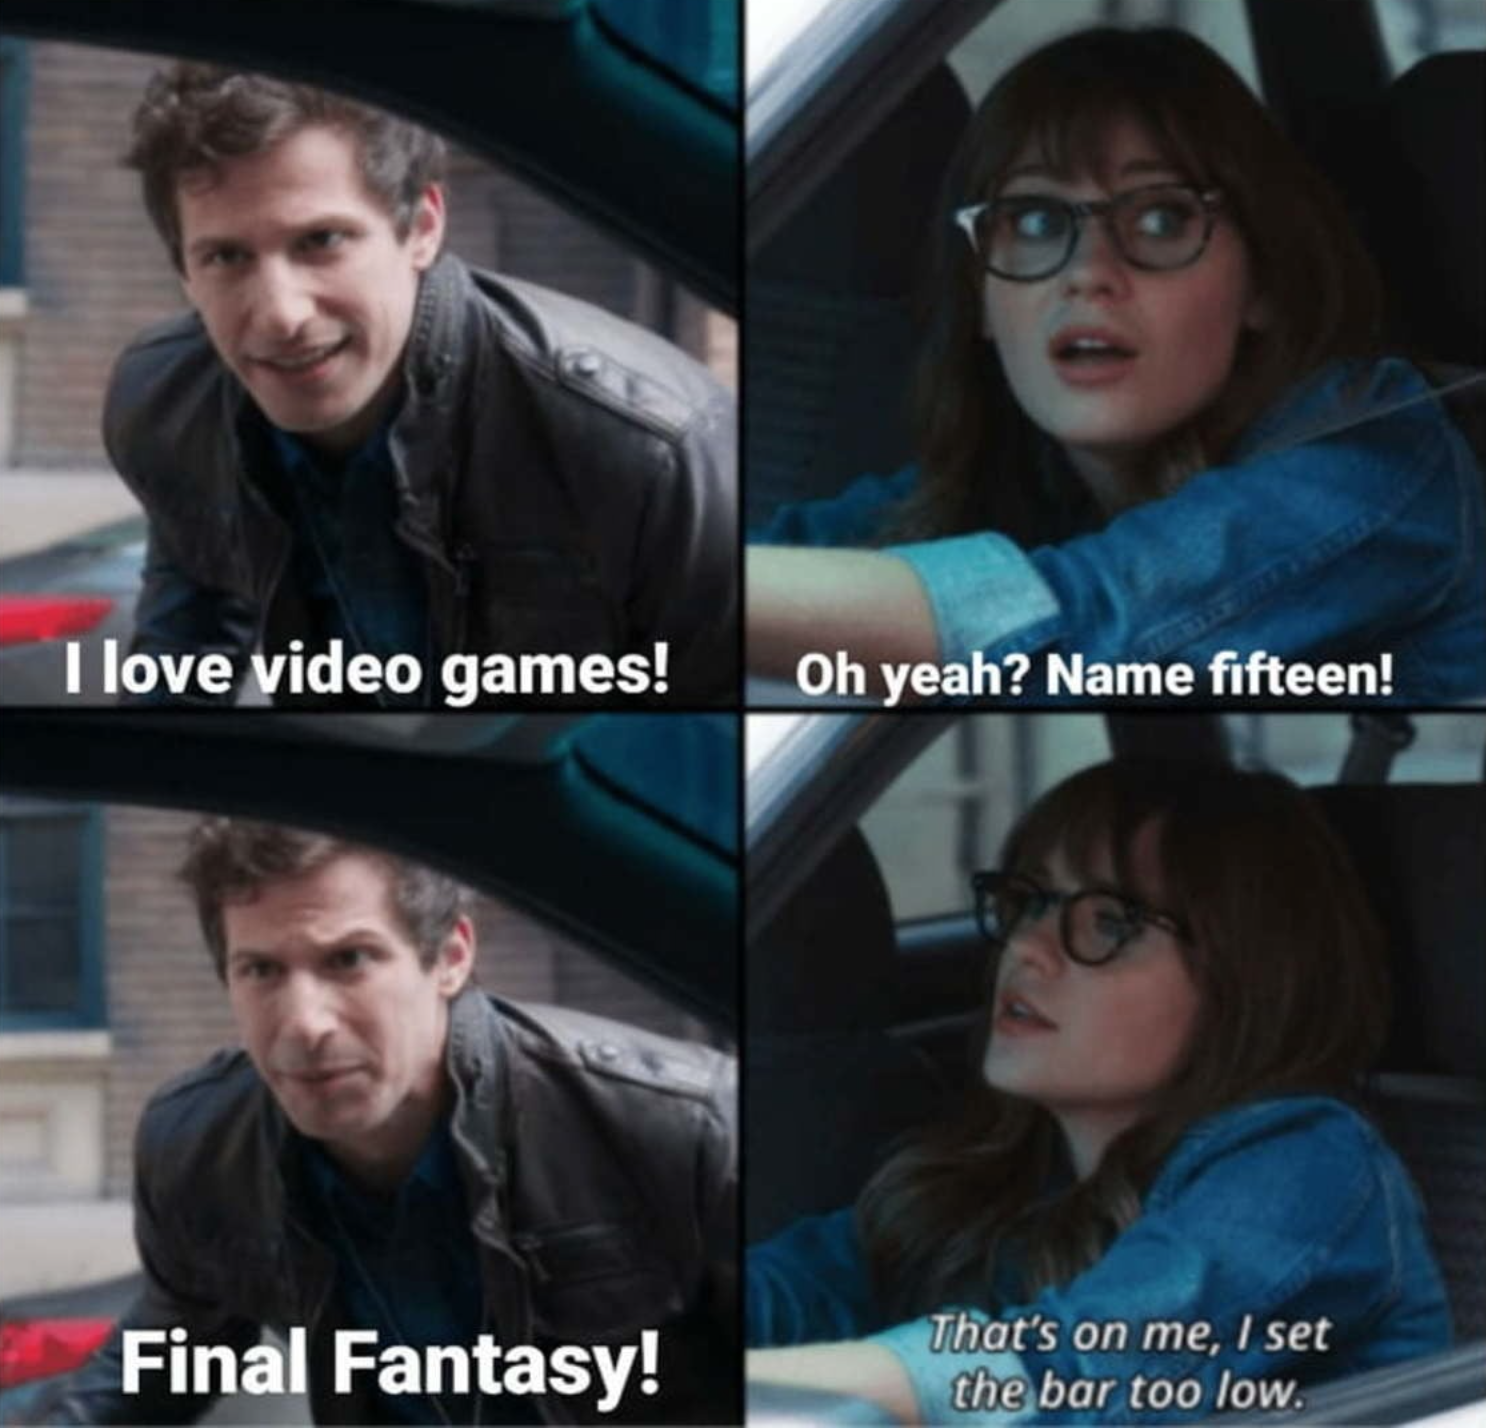 funny gaming memes - that's on me i set the bar too low - I love video games! Oh yeah? Name fifteen! Final Fantasy! That's on me, I set the bar too low.